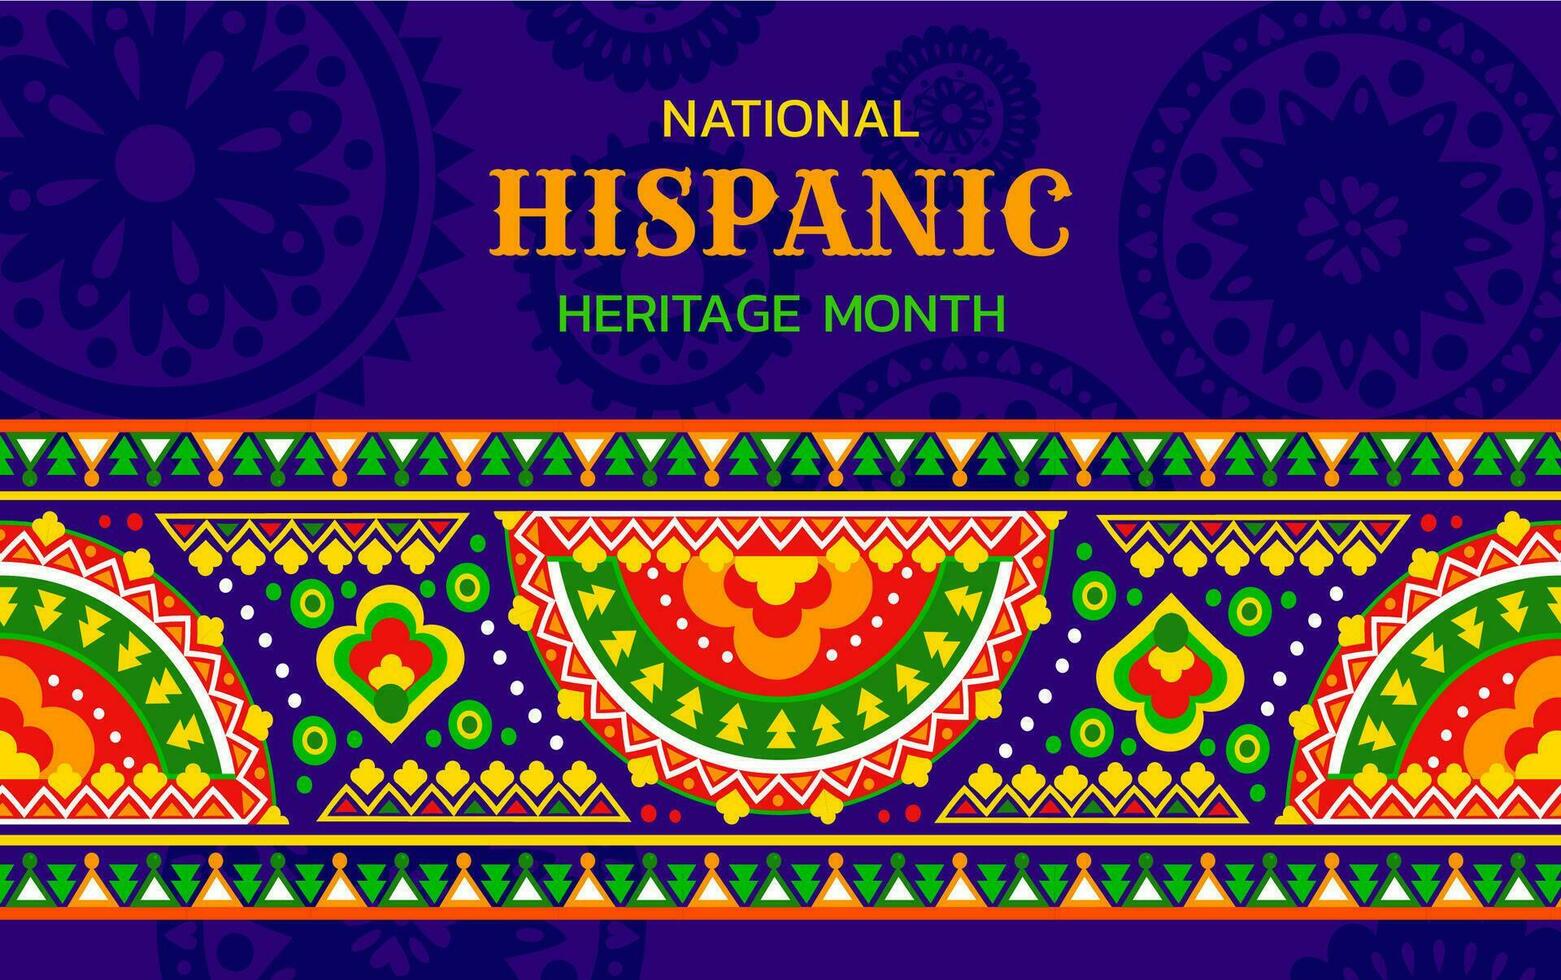 Hispanic Heritage Month banner with floral pattern vector